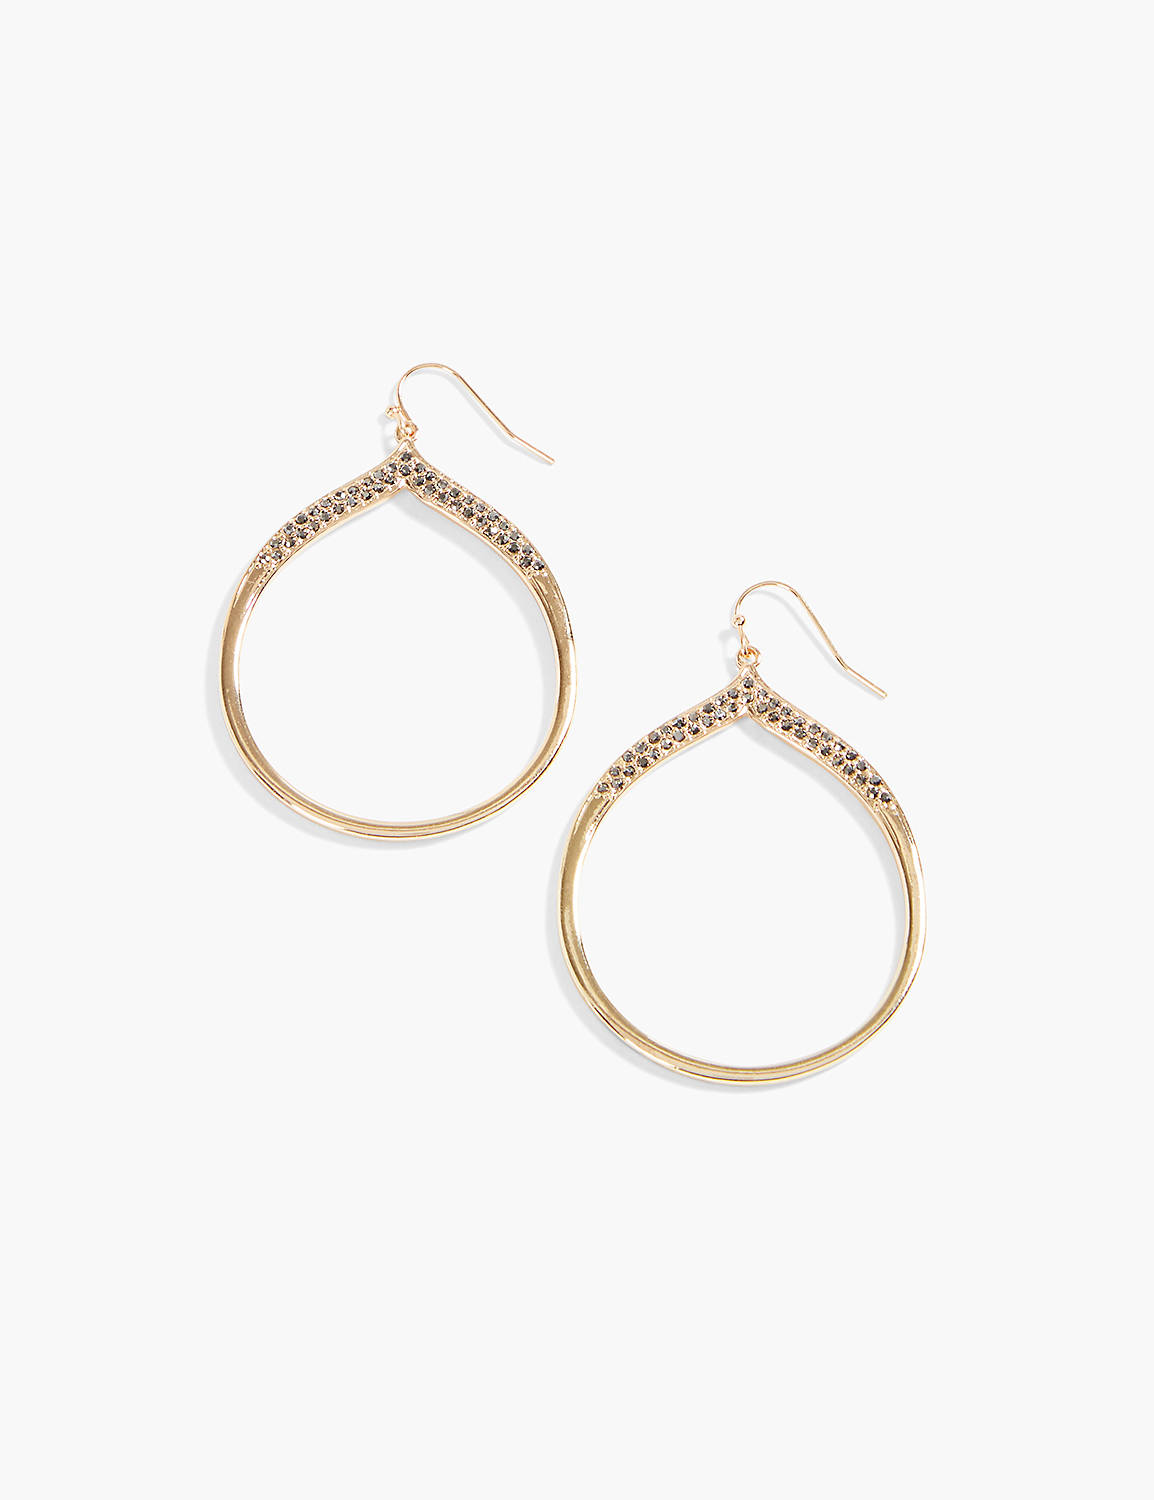 PAVE FRONT HOOP DROP EARRING:Mixed Metal:ONESZ Product Image 1